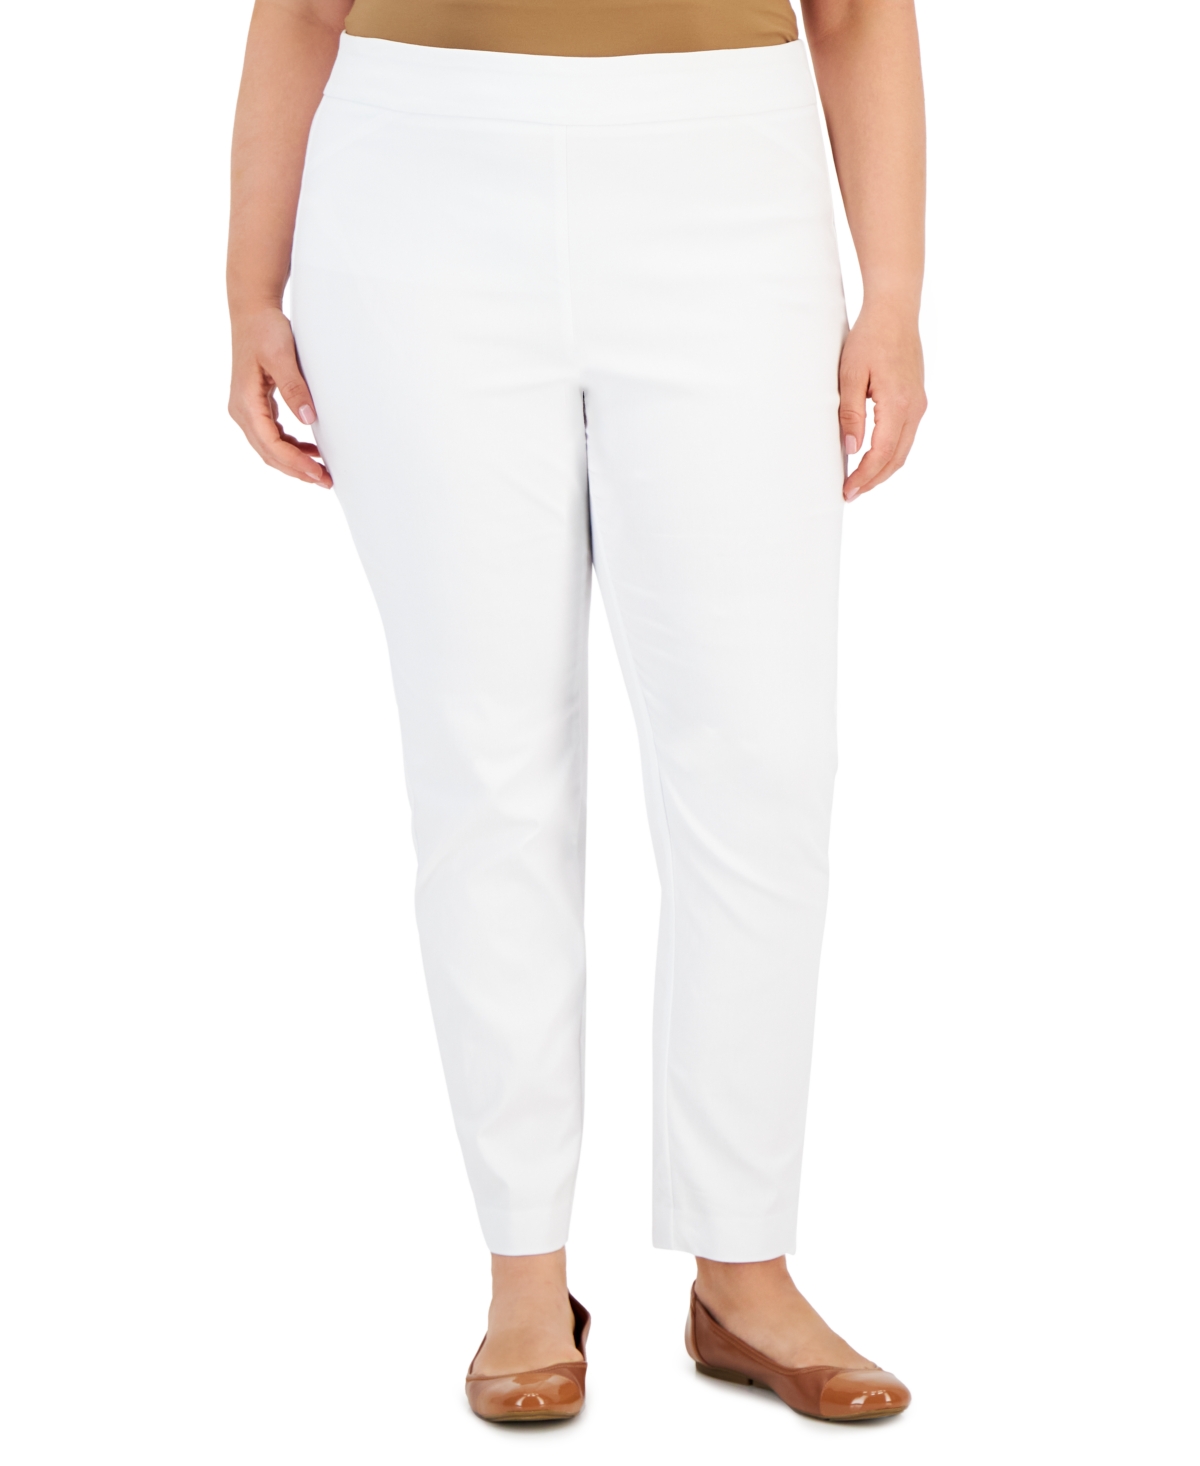 Plus Size Pull-On Cambridge Pants, Created for Macy's - Bright White